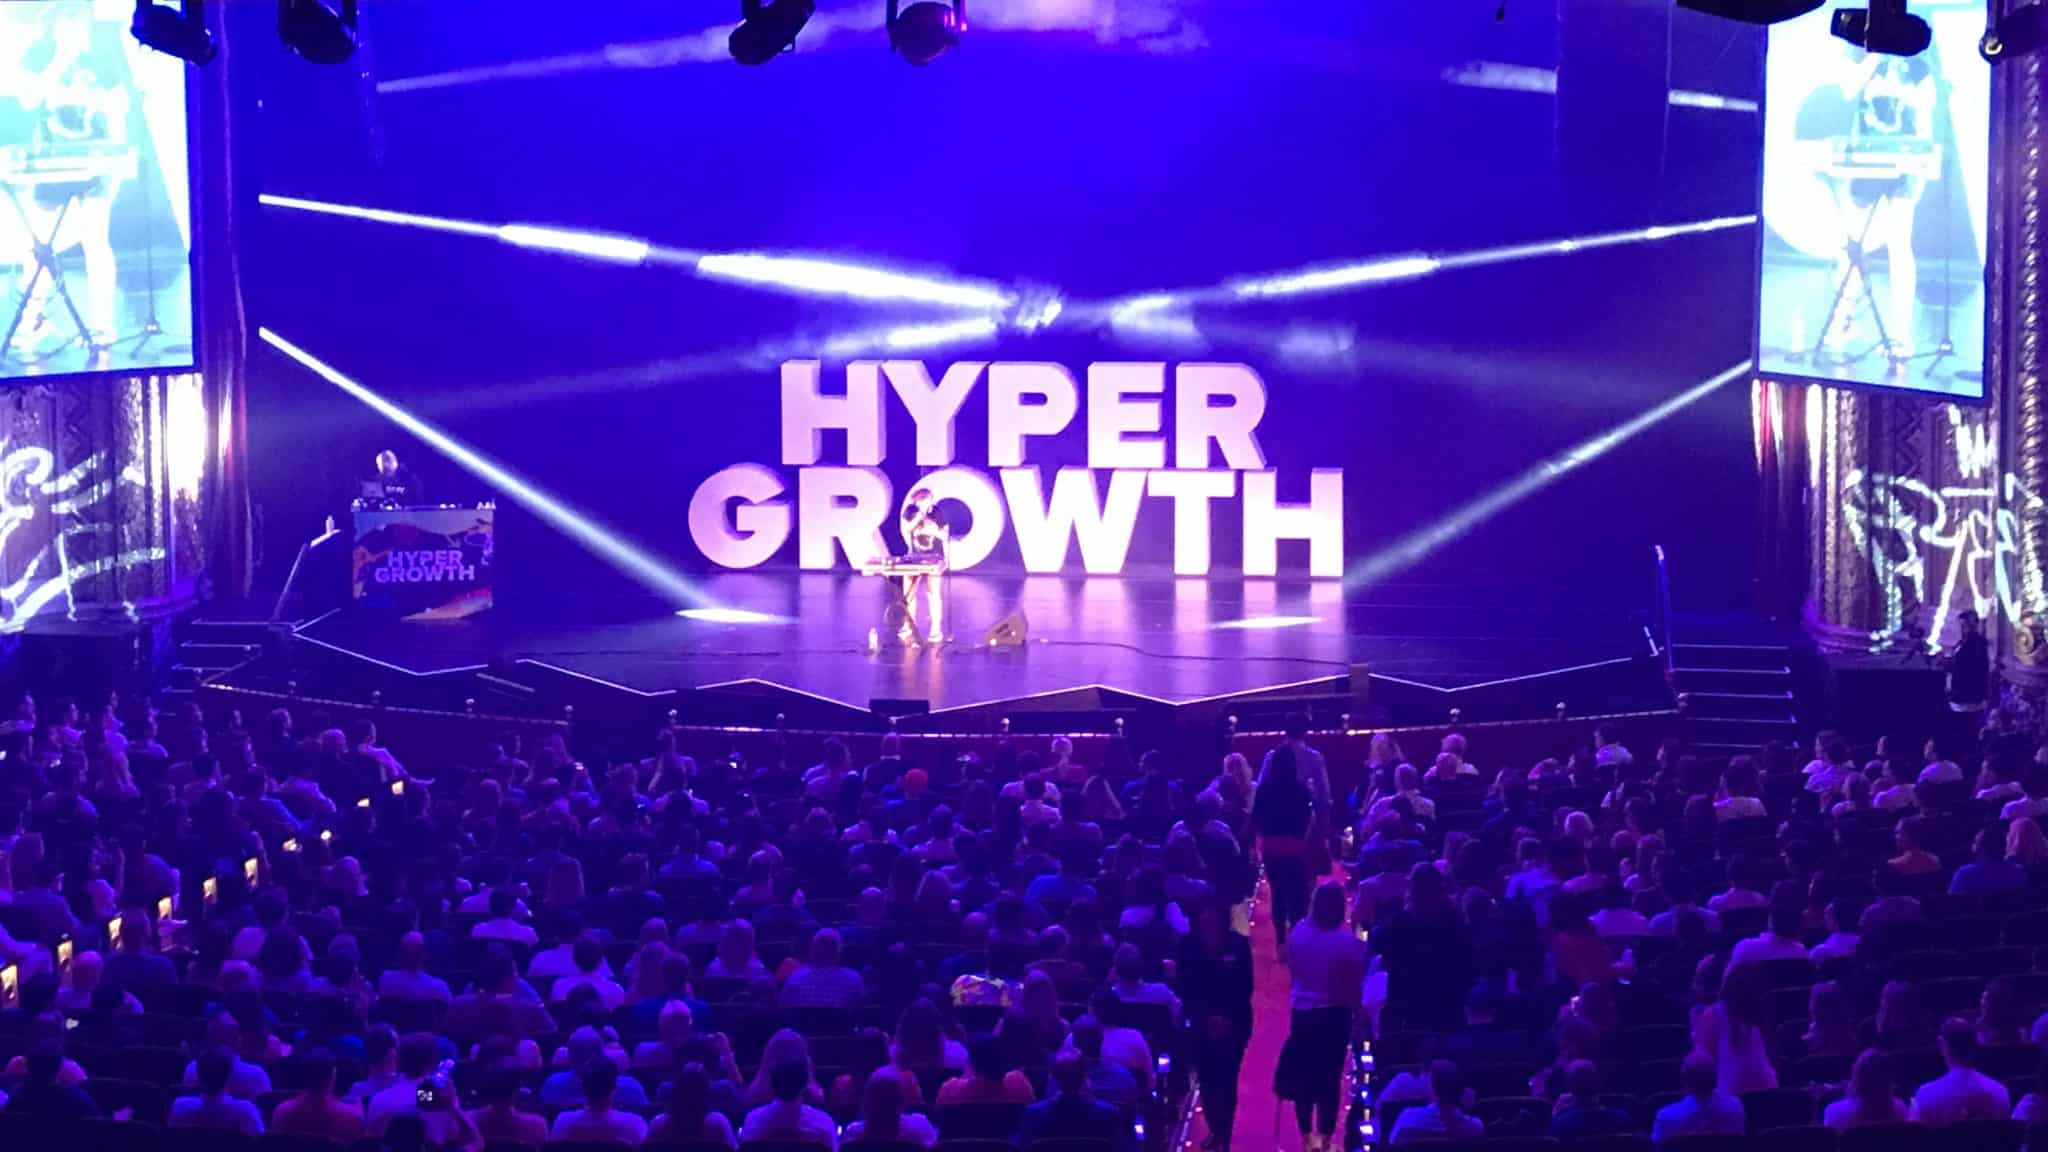 image of the drift hyper growth conference representing: Why Hire Corporate Event Video Production Specialists?